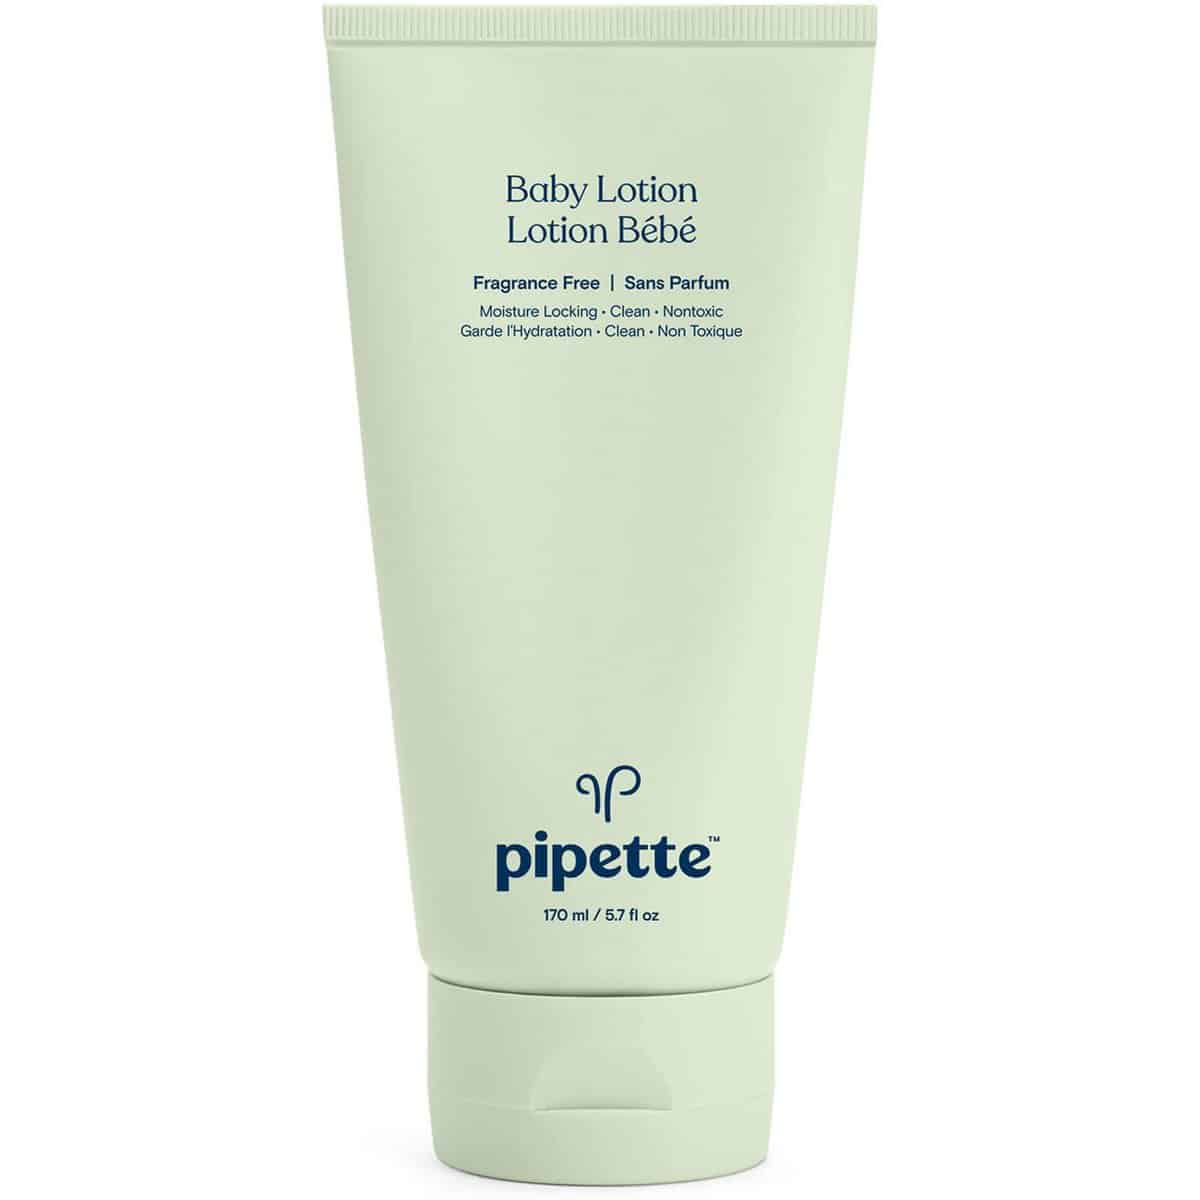 A bottle of Pipette brand body lotion.